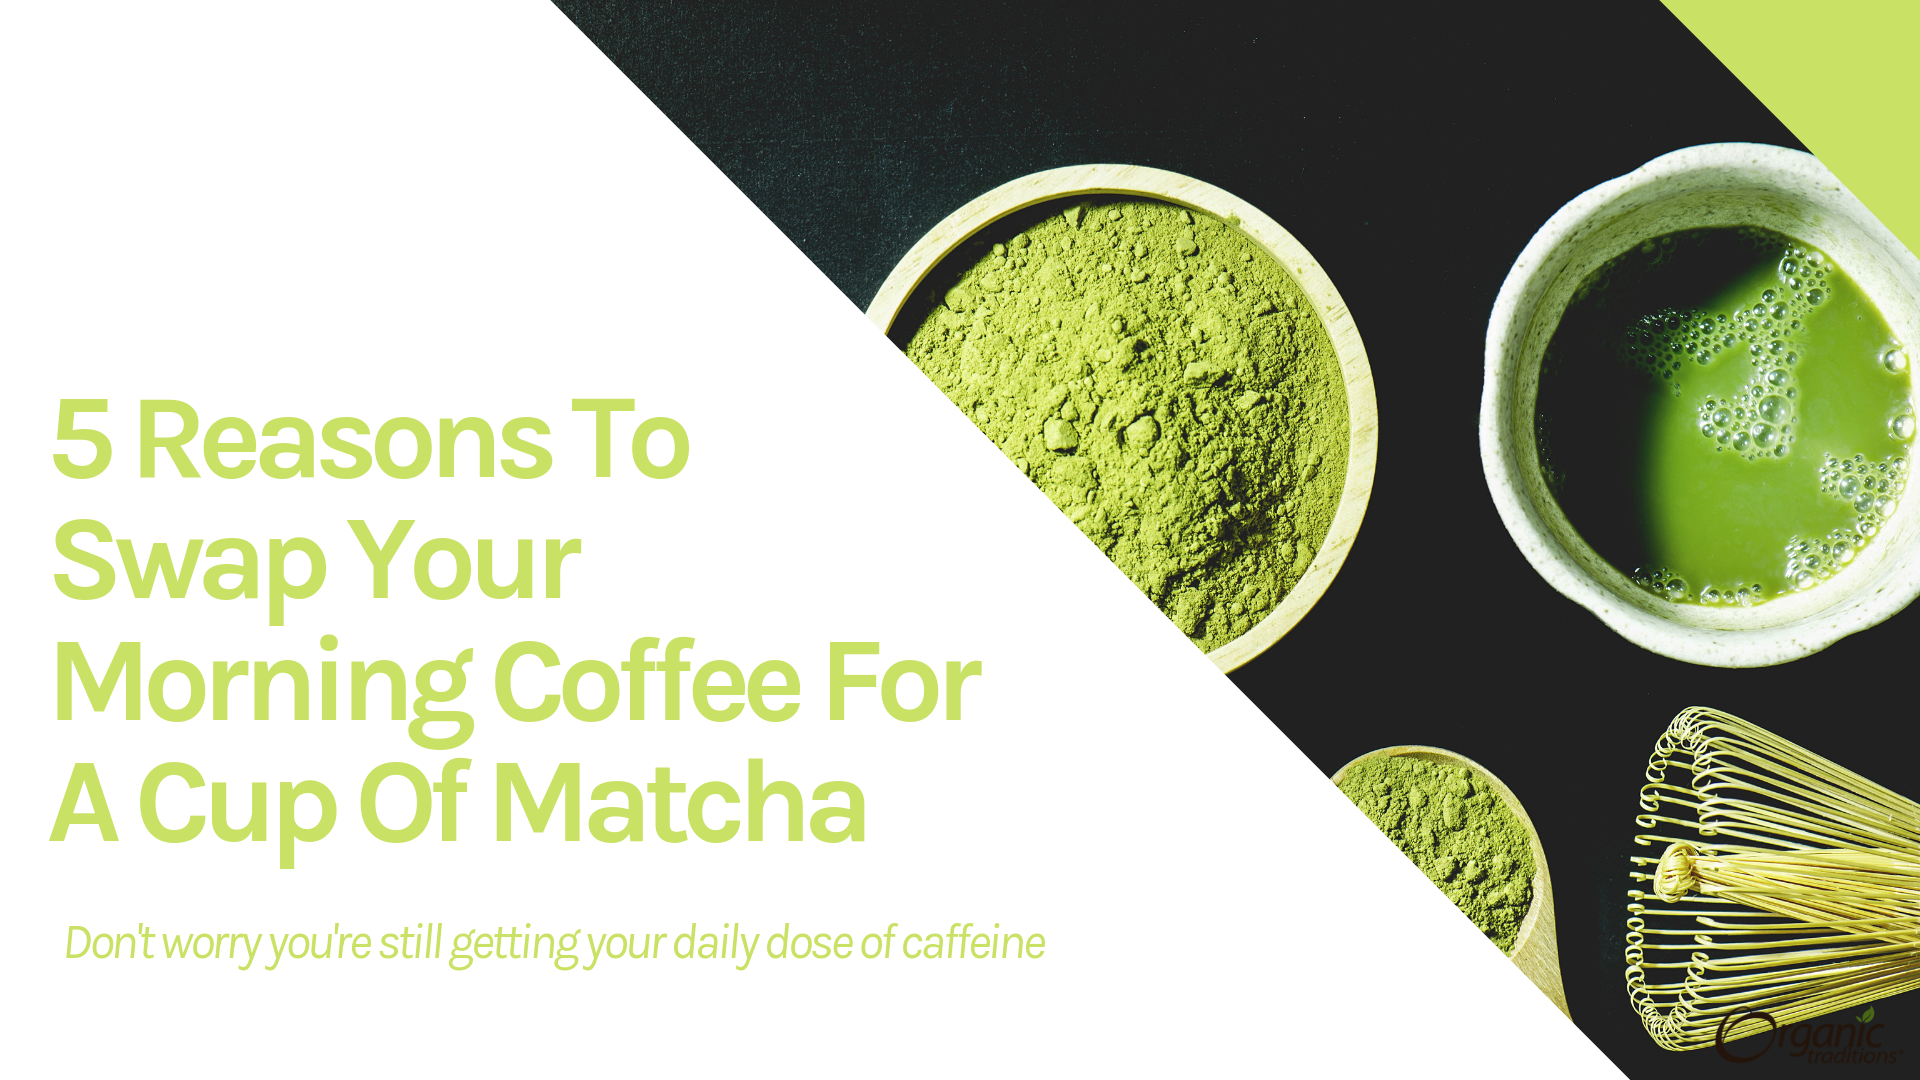 5 Reasons To Swap Your Morning Coffee For A Cup Of Matcha